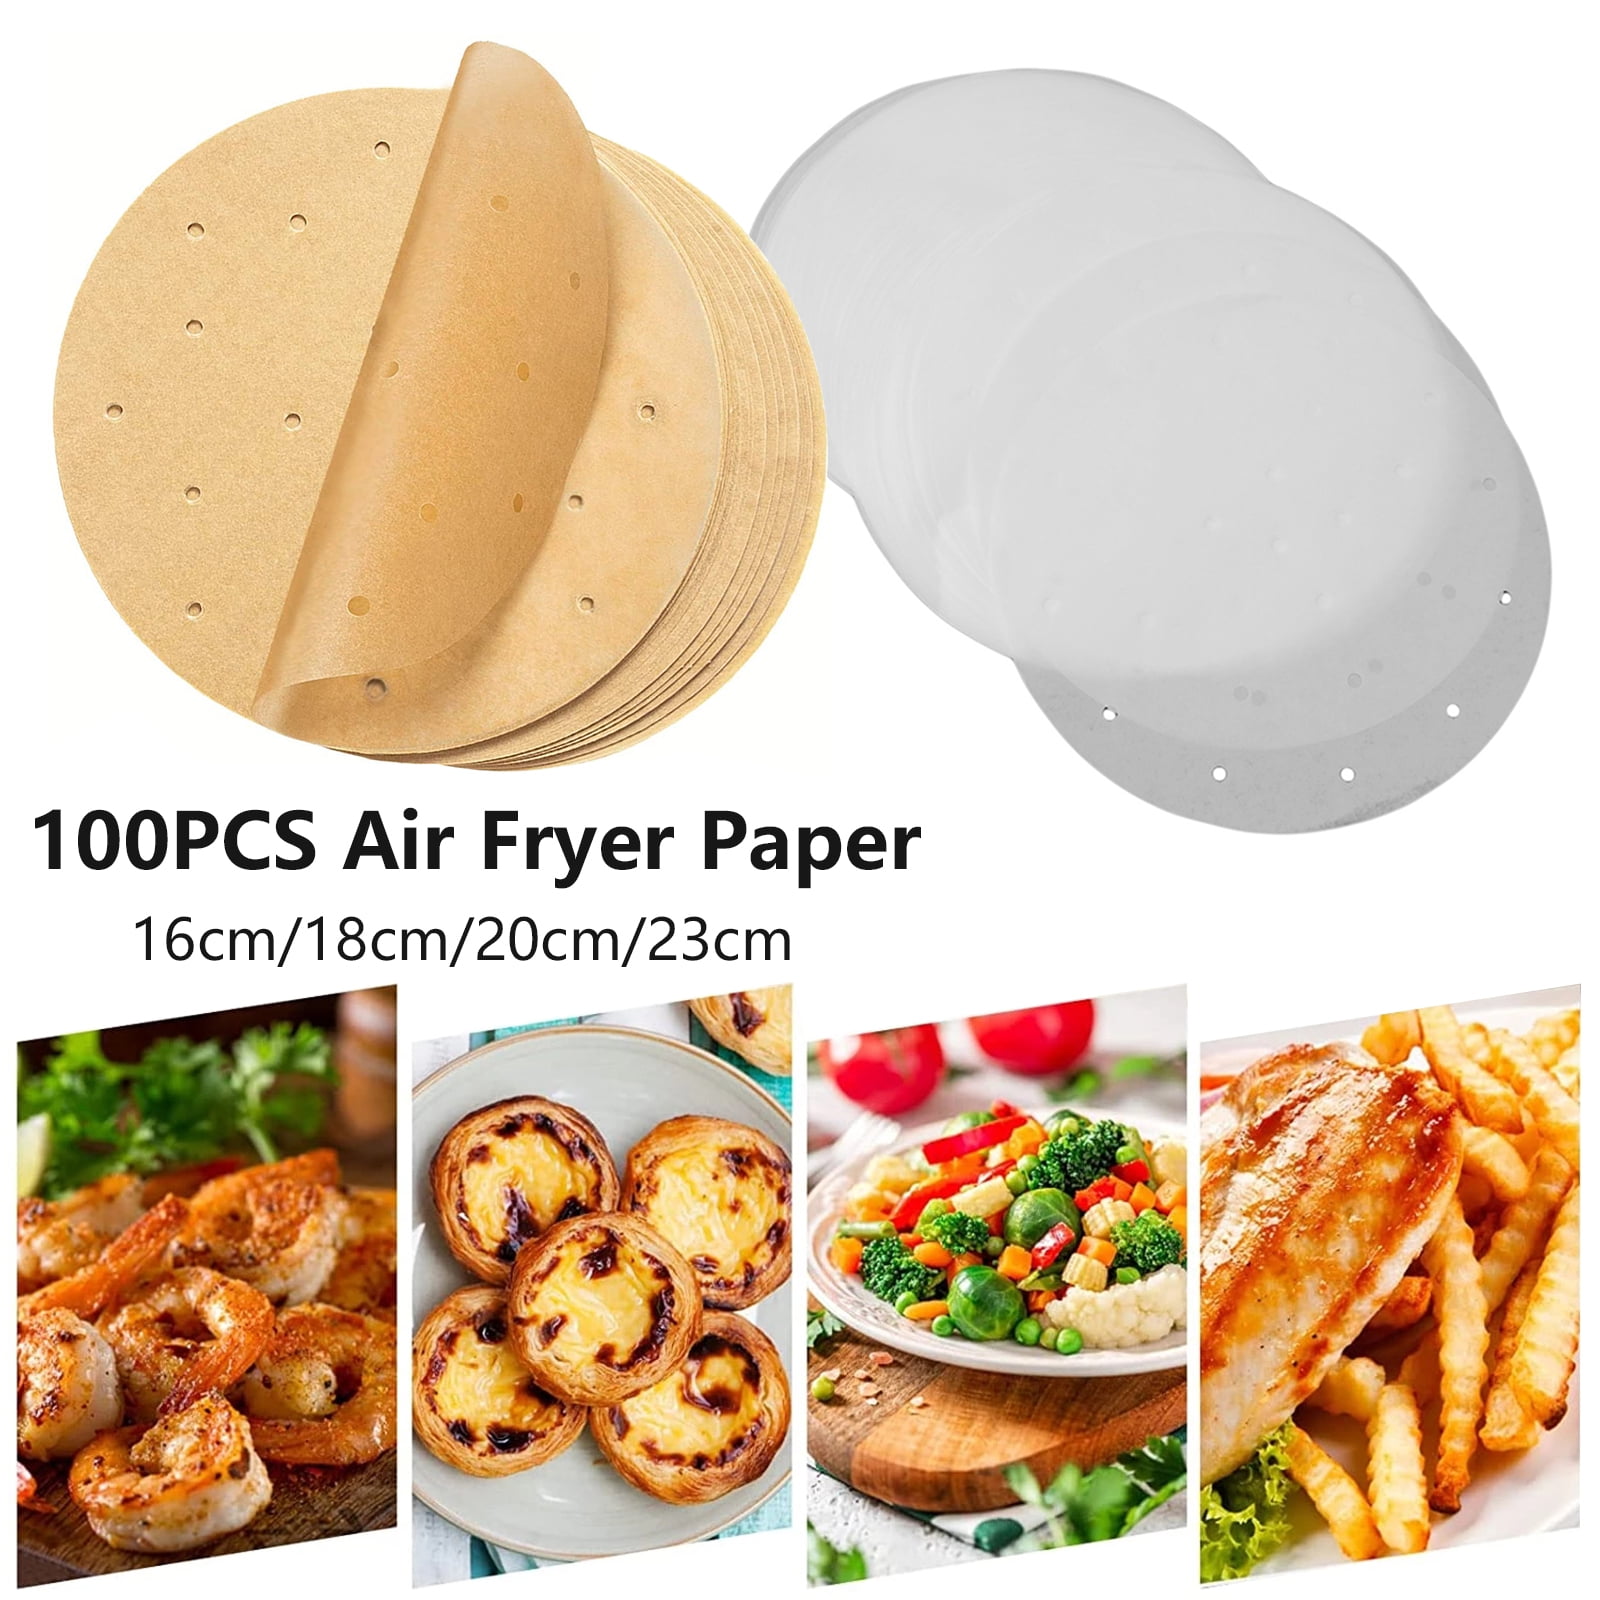 100x Air Fryer Liners Steaming Pad Papers Parchment Pad Baking Silicone W3P6 